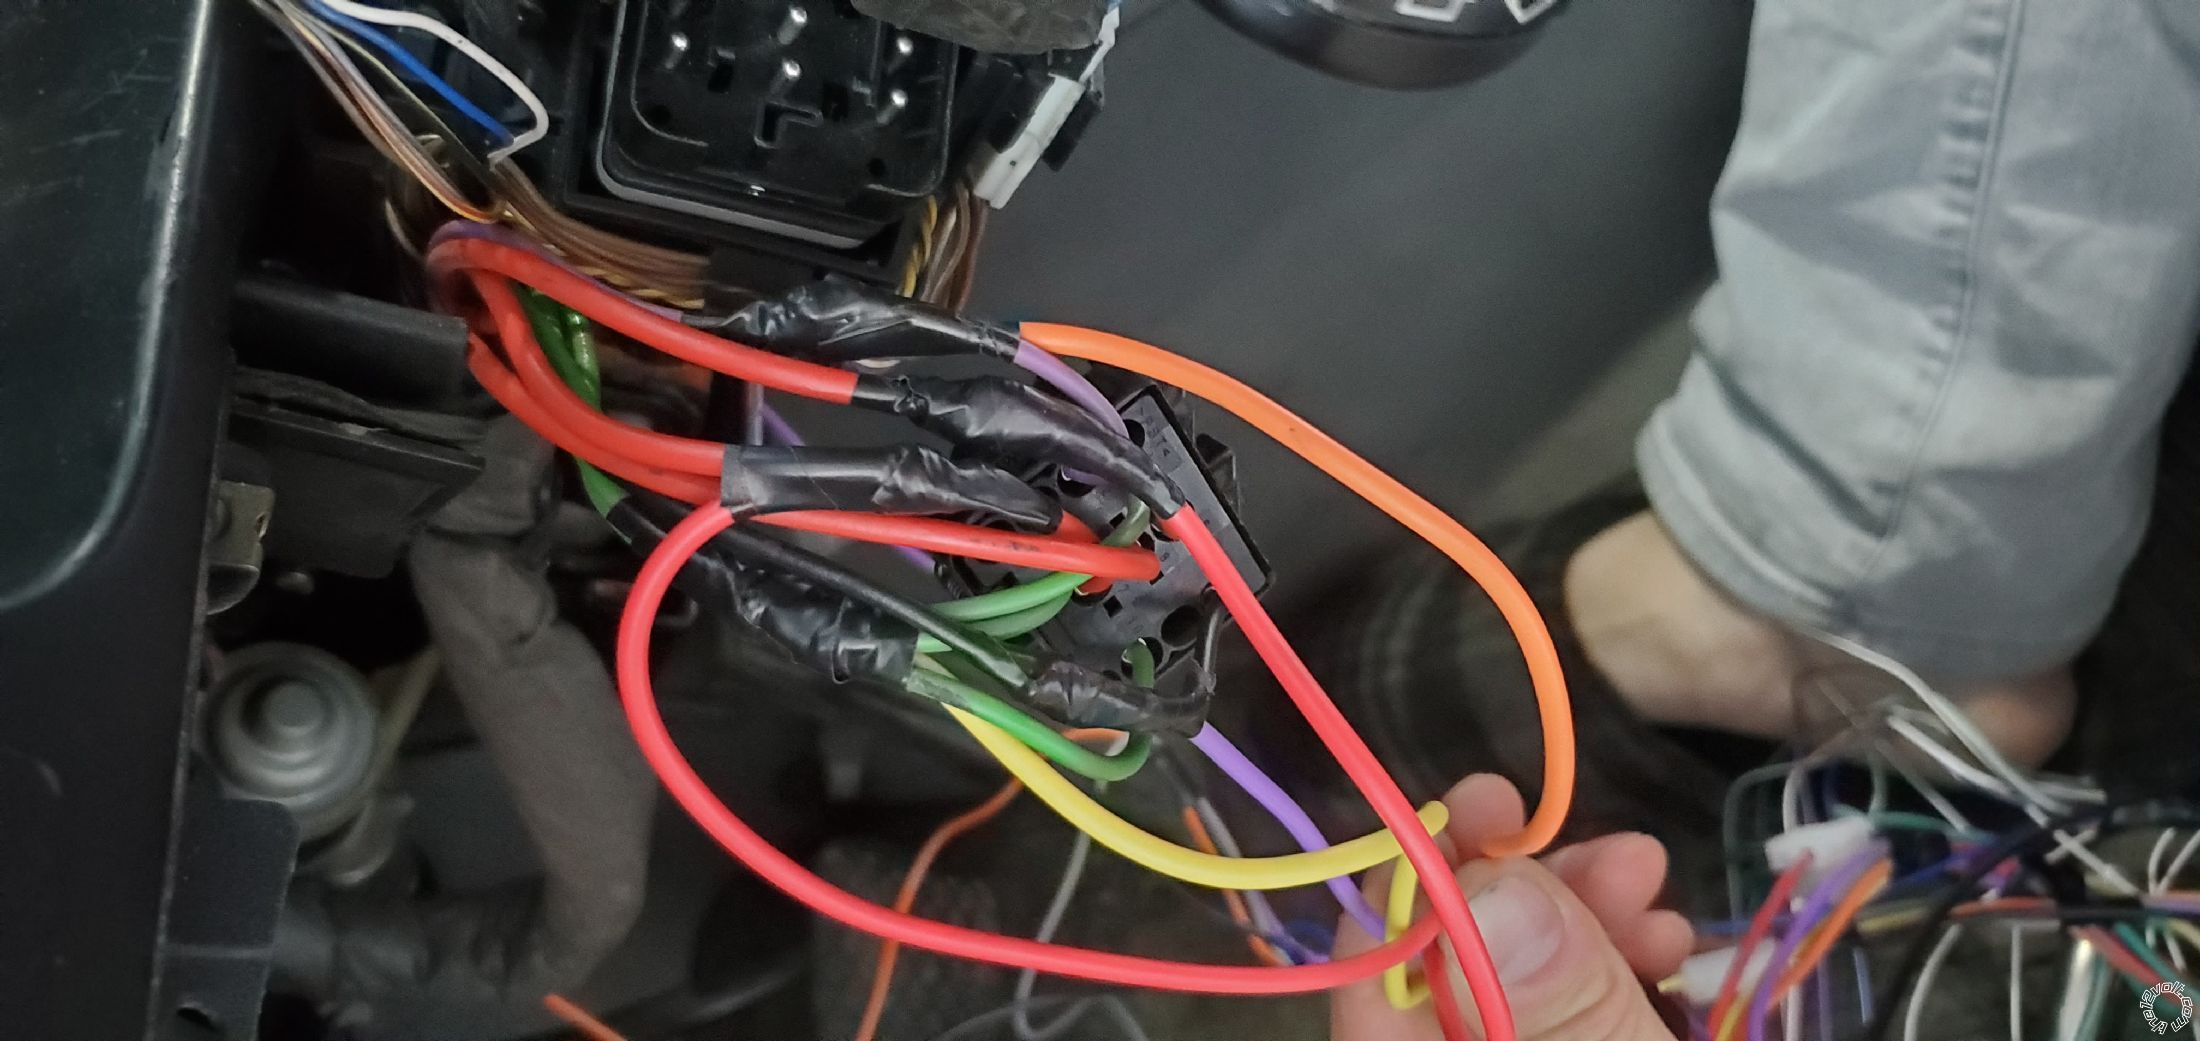 BMW E39 Remote Starter Wiring Confusion - Page 2 -- posted image.